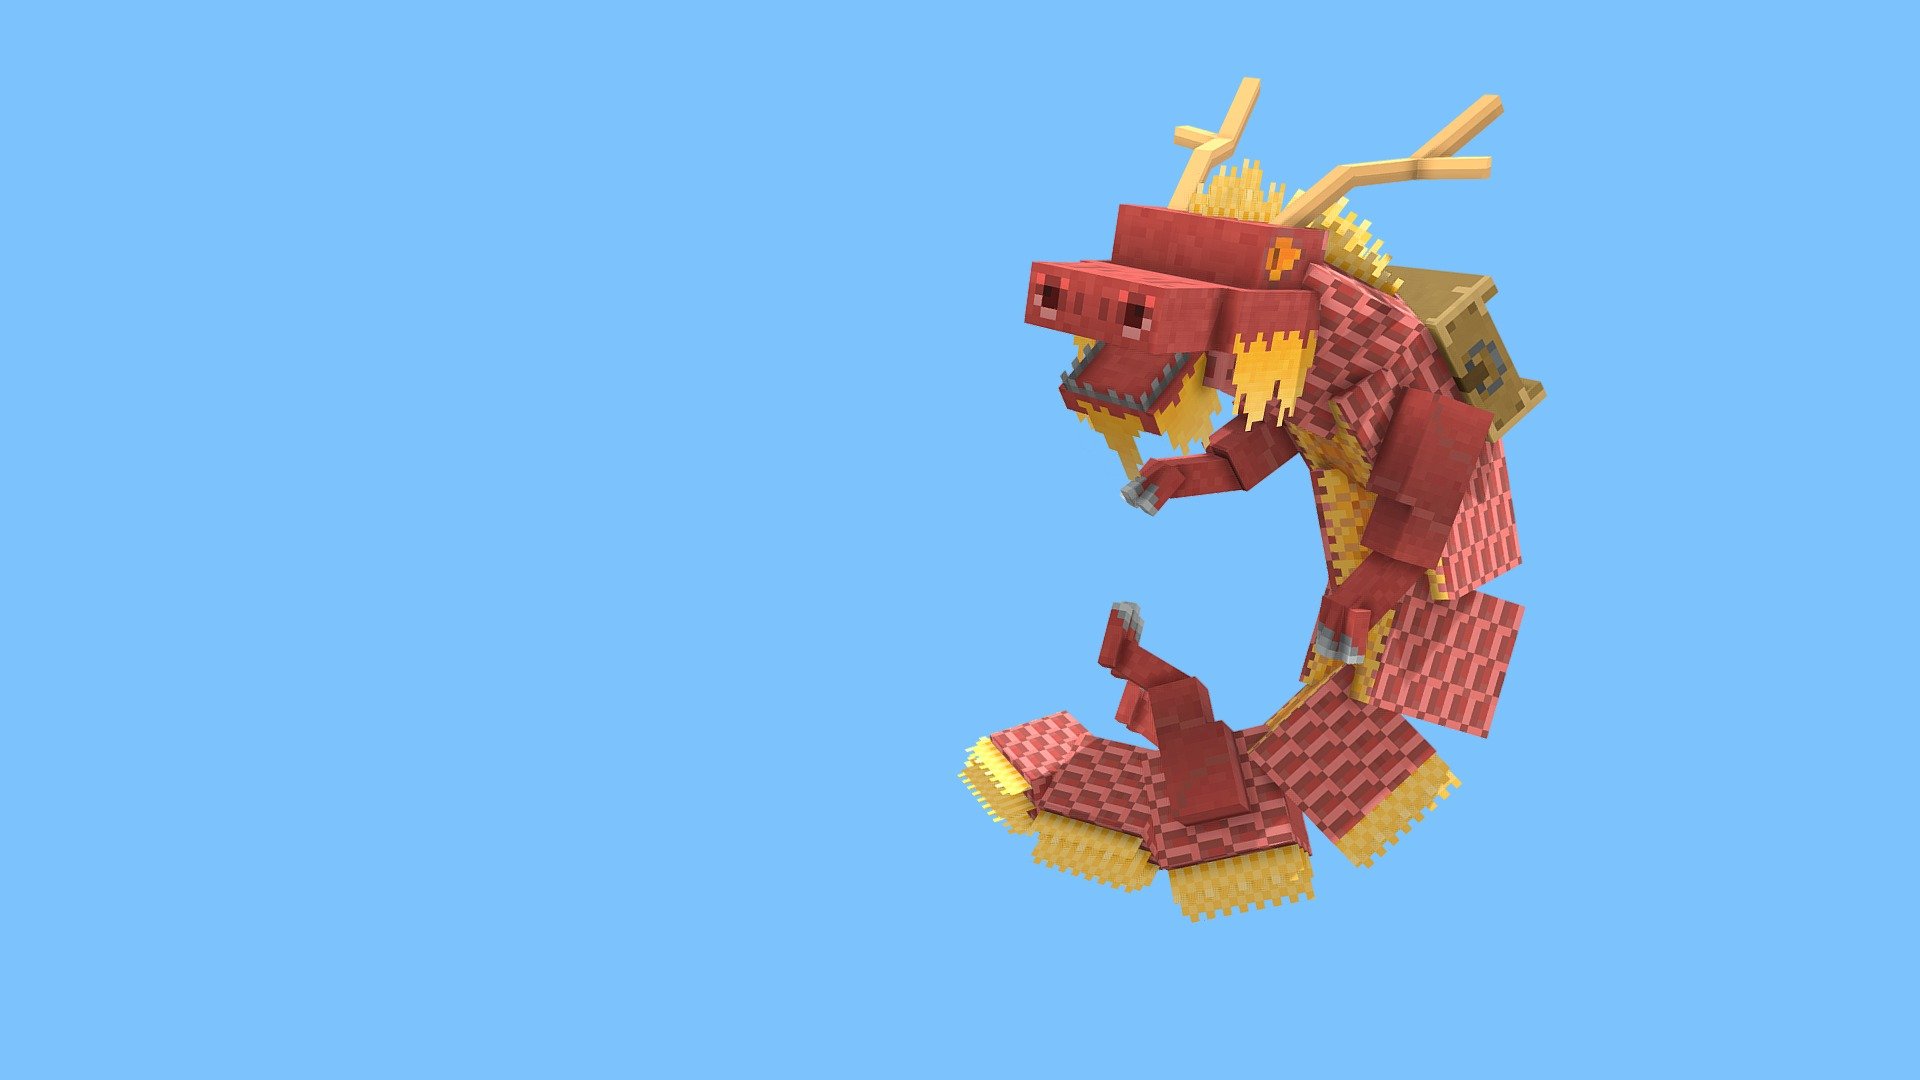 This was a commission for Entity Builds Dragon Valley Map.

Avaliable on the Minecraft Bedrock Marketplace - Dragon Valley - Oriental Dragon - 3D model by Rizaan (@quinten790) 3d model